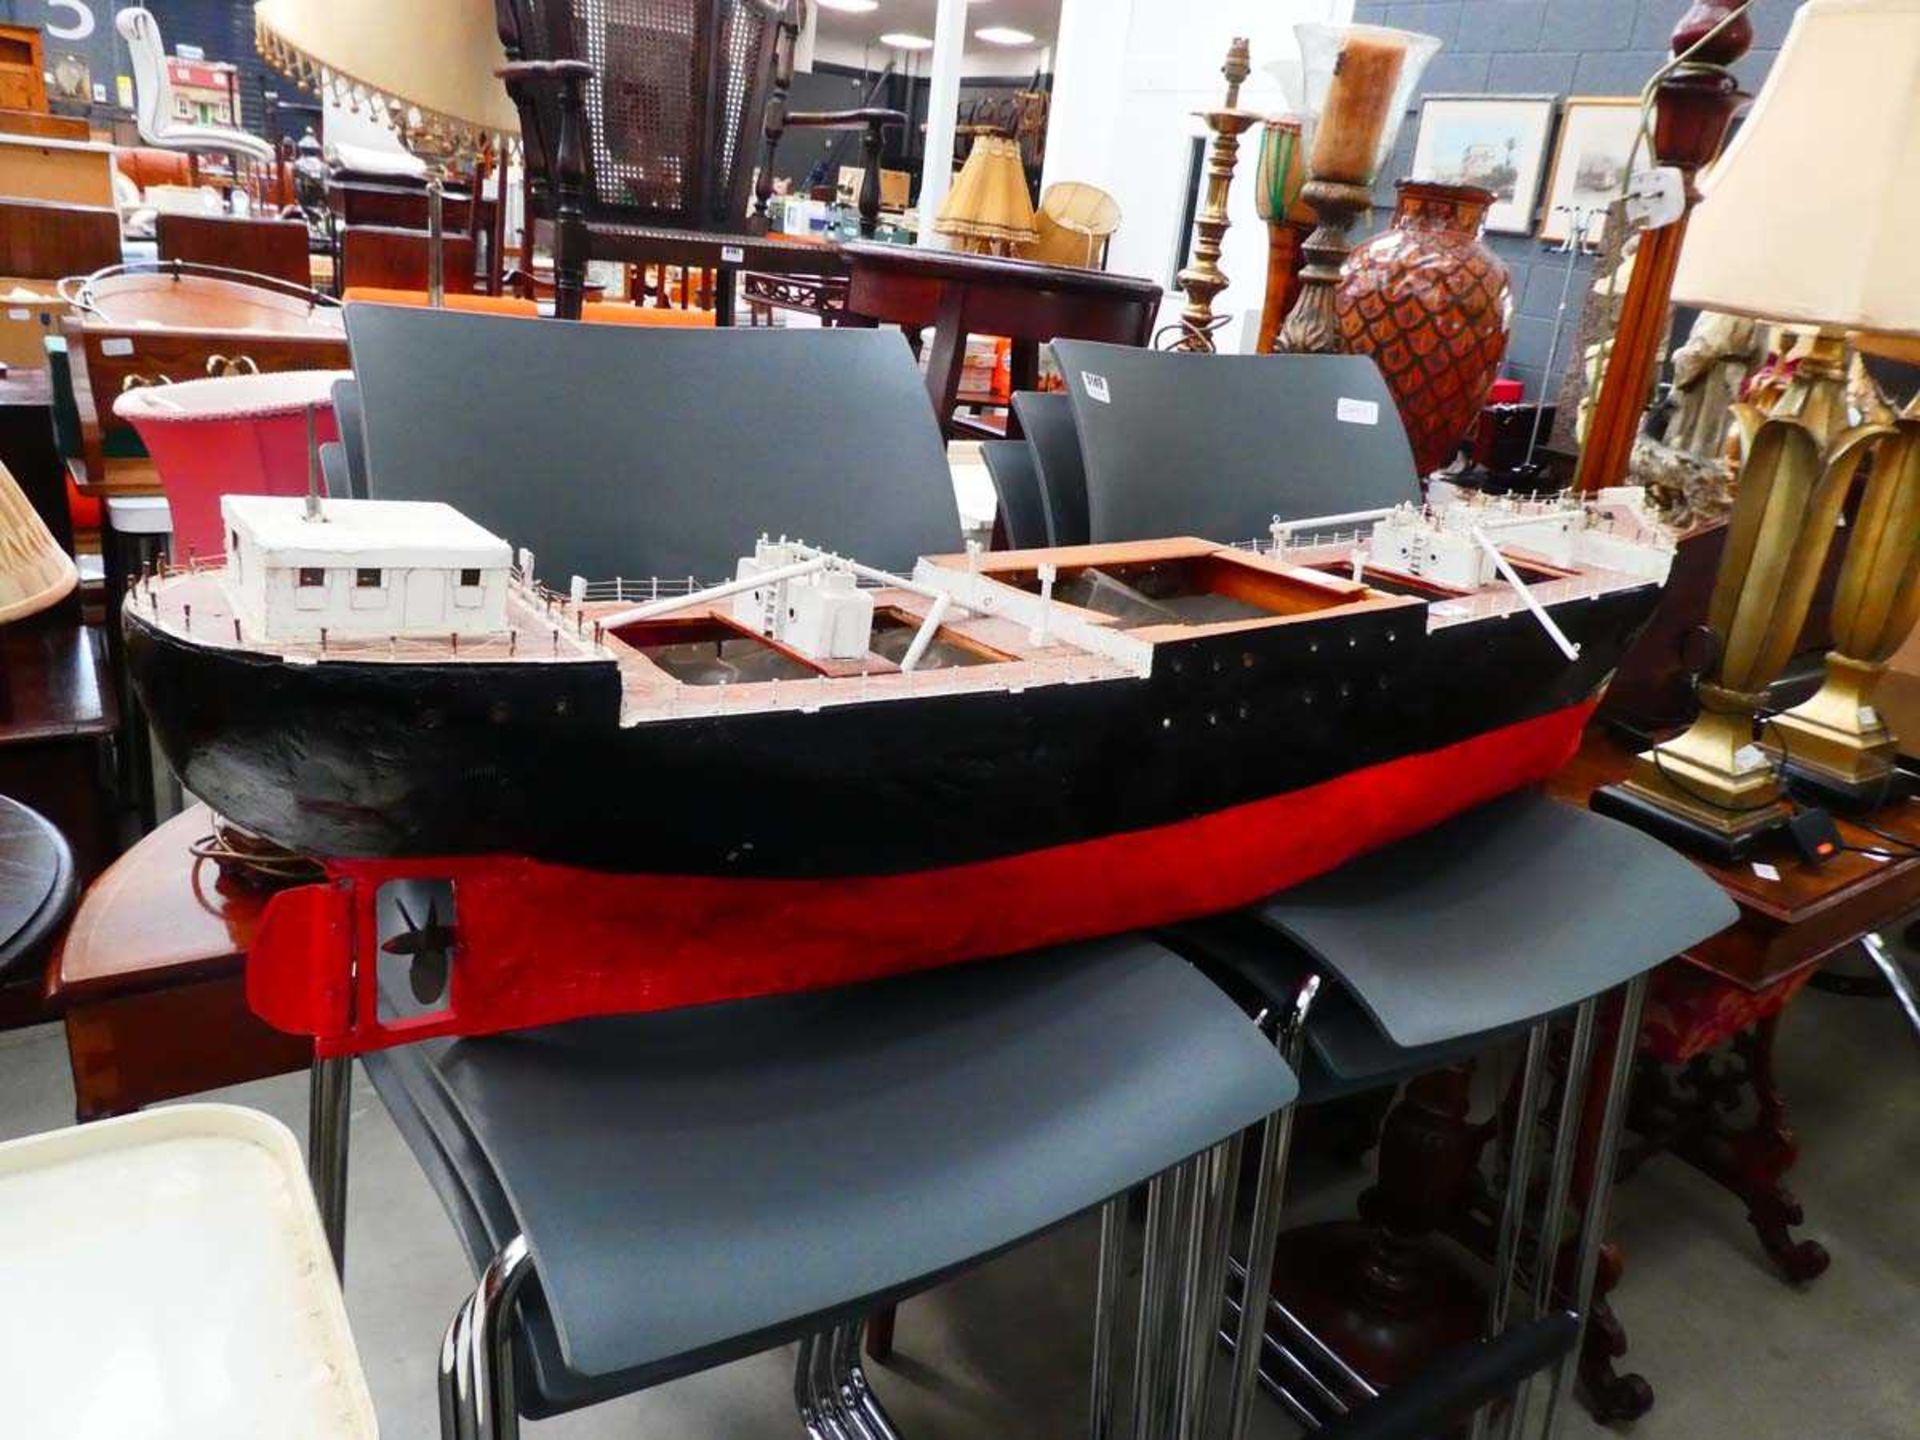 Incomplete model of a fishing trawler